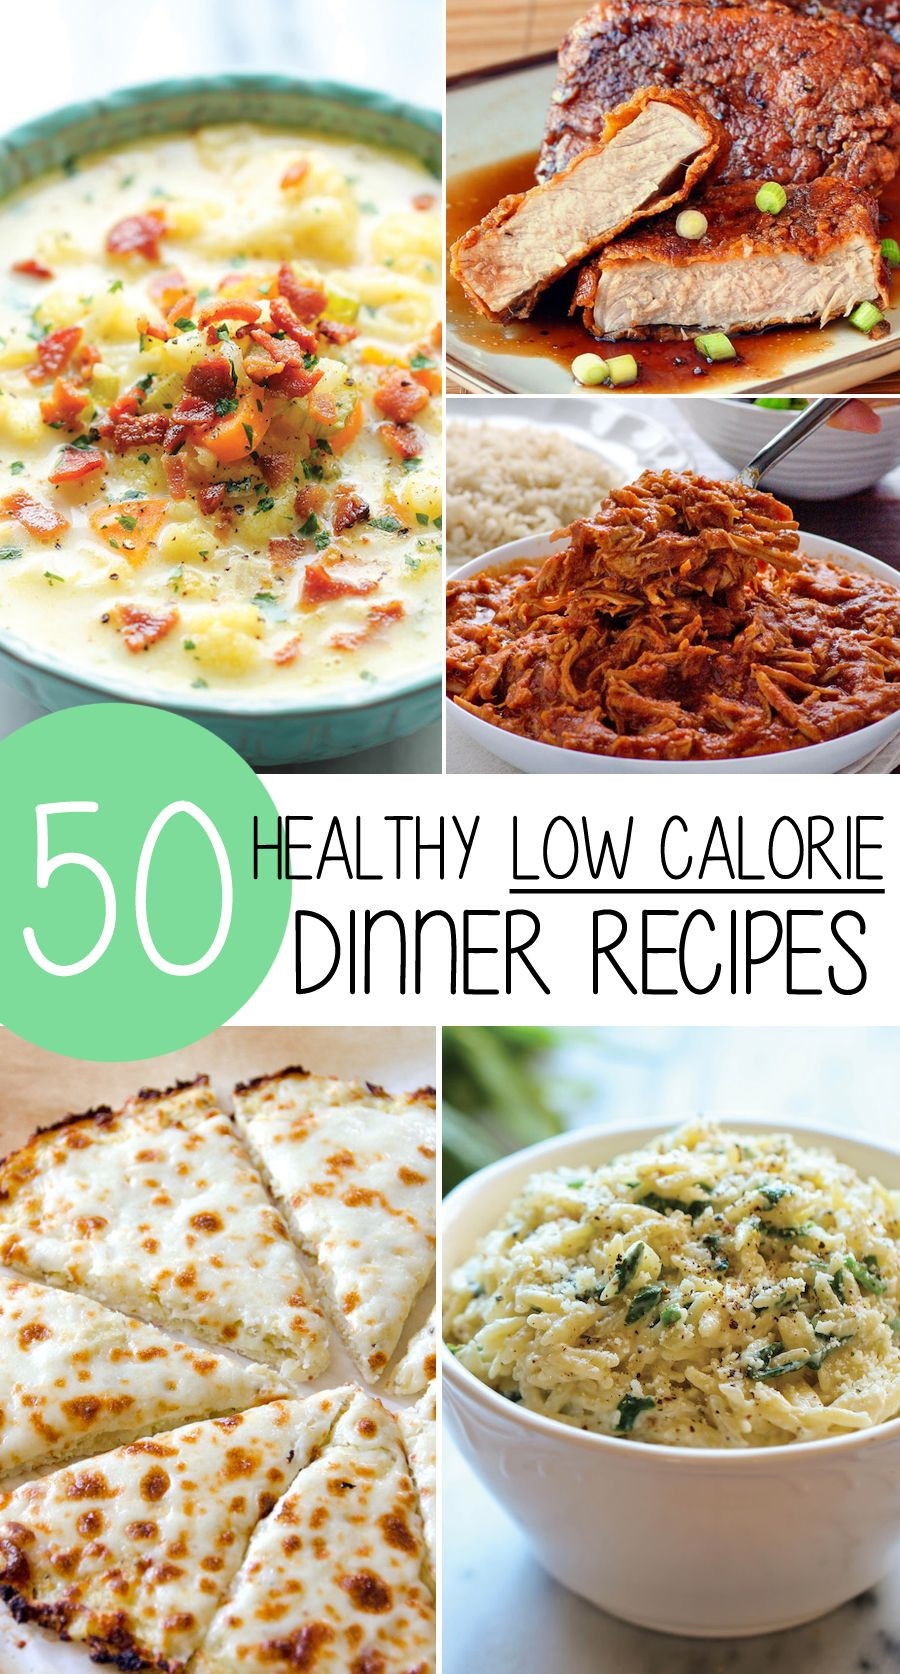 Easy Low Cholesterol Recipes For Dinner
 Pin on YUM YUM